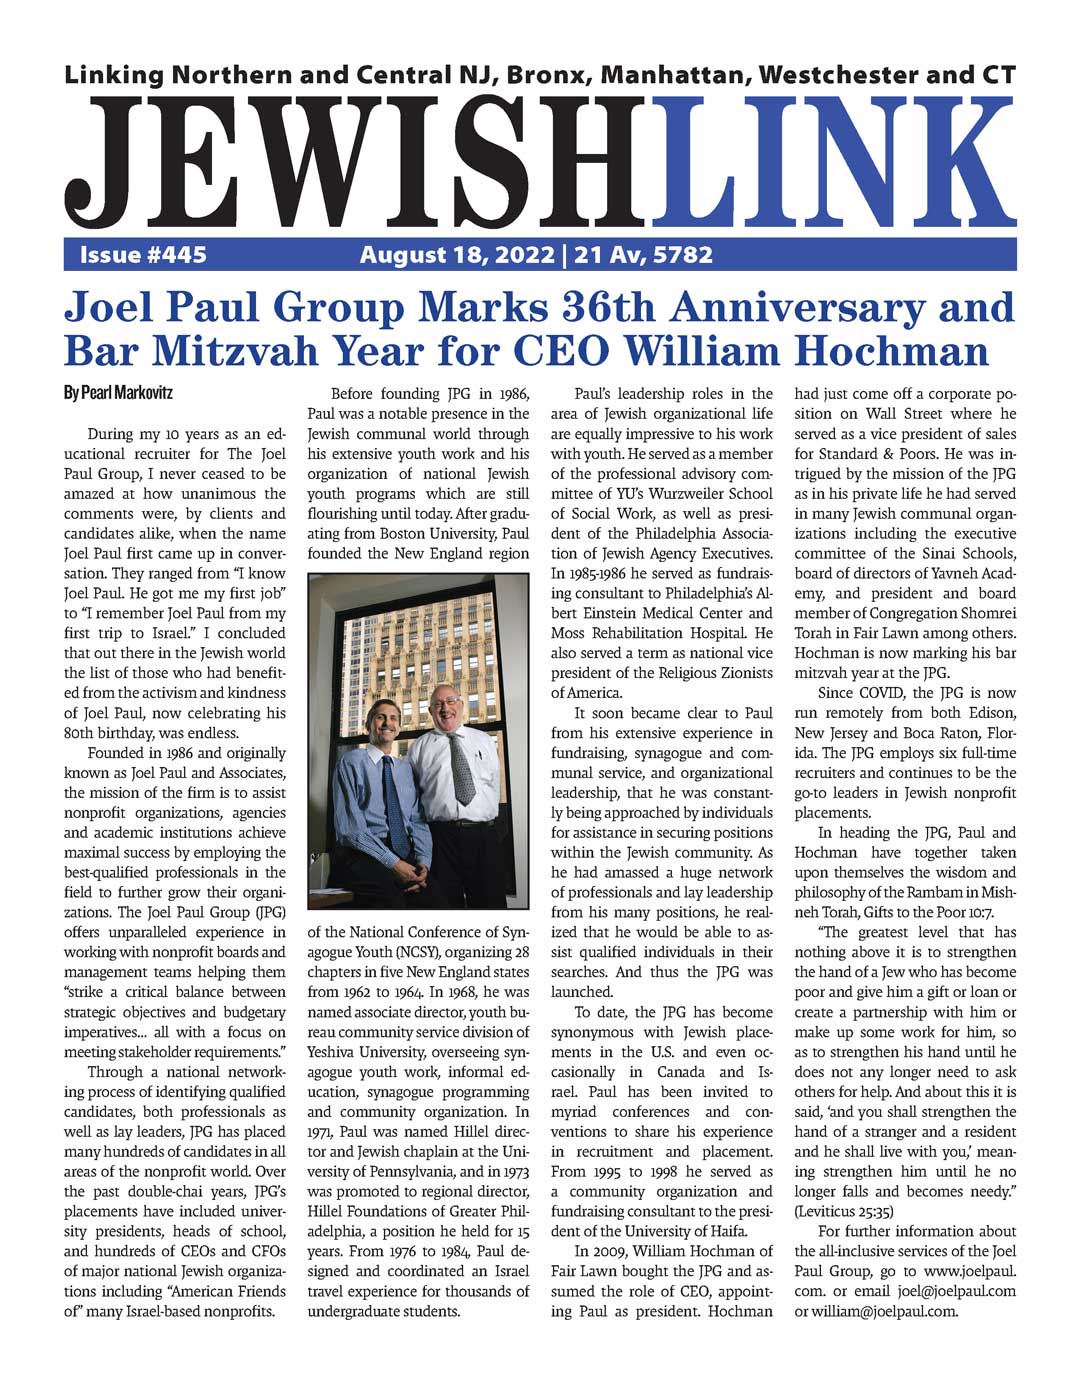 Joel Paul Group Marks 36th Anniversary and Bar Mitzvah Year for CEO William Hochman